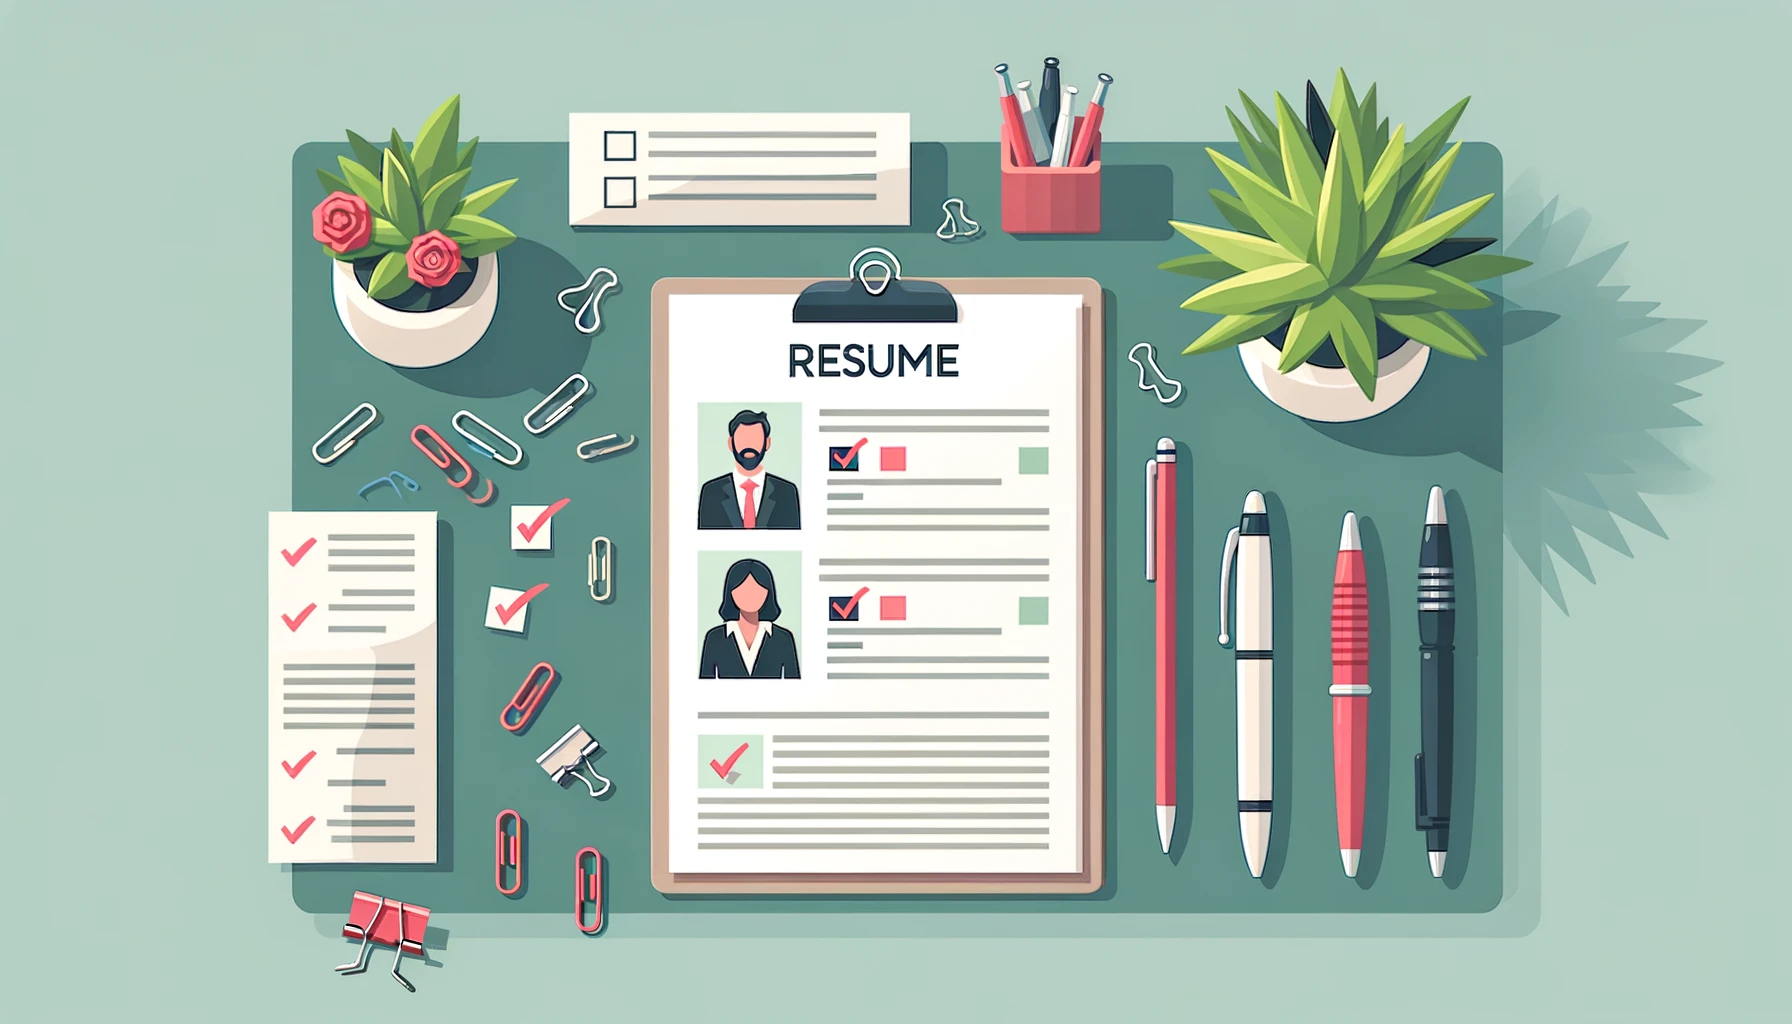 Avoid These 8 Resume Mistakes to Land Your Dream Job